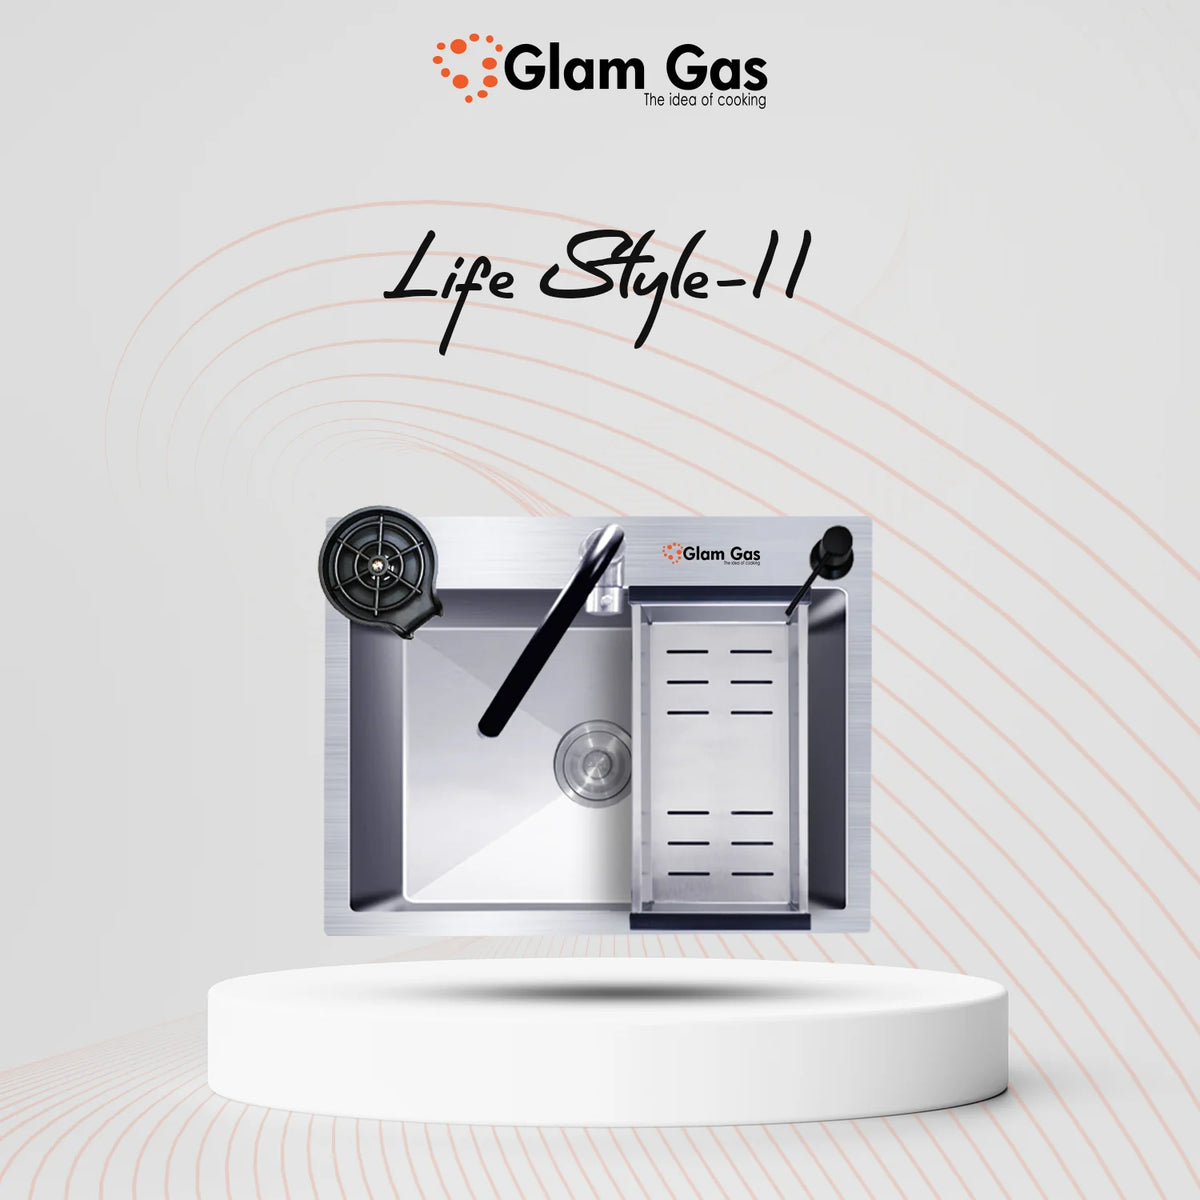 Glam Gas Lifestyle 11 | Glam Gas Sink | Stainless steel sink | Kitchen Sink | Single Kitchen Bowl | Kitchen Basin   1 Year Brand Warranty